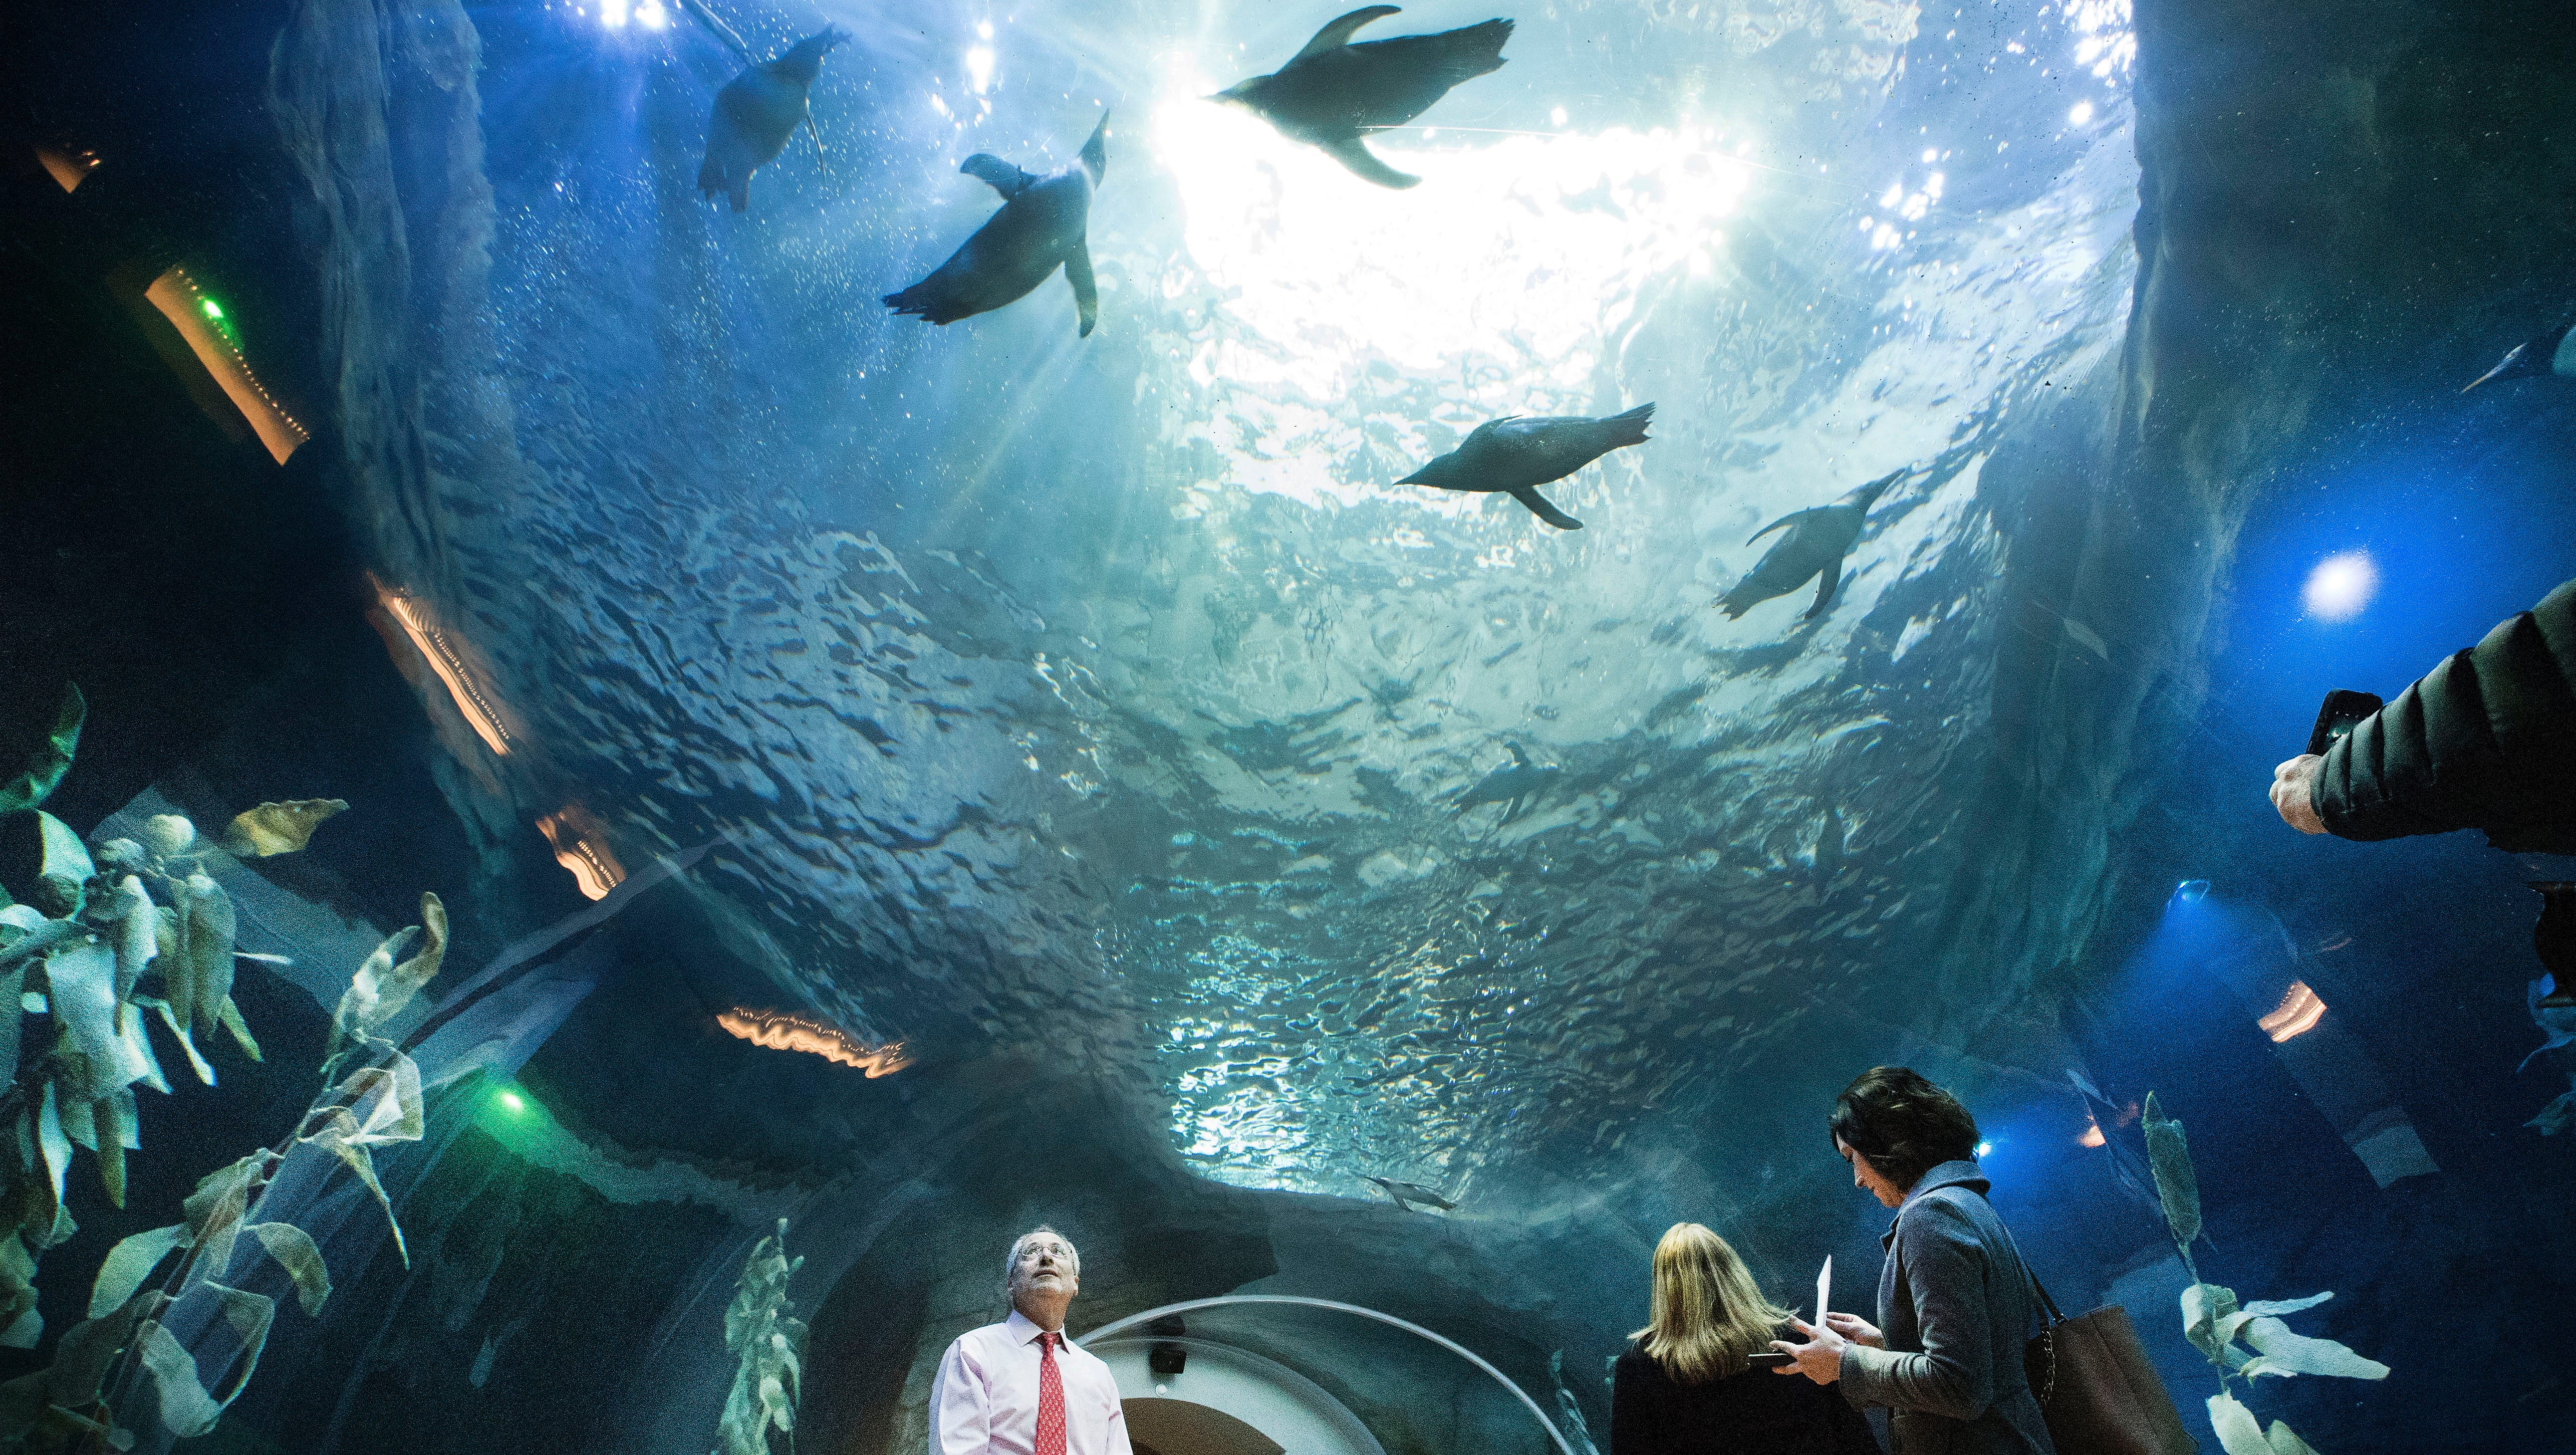 Detroit Zoological Society Executive Director and CEO Ron Kagan enjoys one of several underwater views at the new Polk Penguin Conservation Center at the Detroit Zoo in Royal Oak on April 13, 2016.